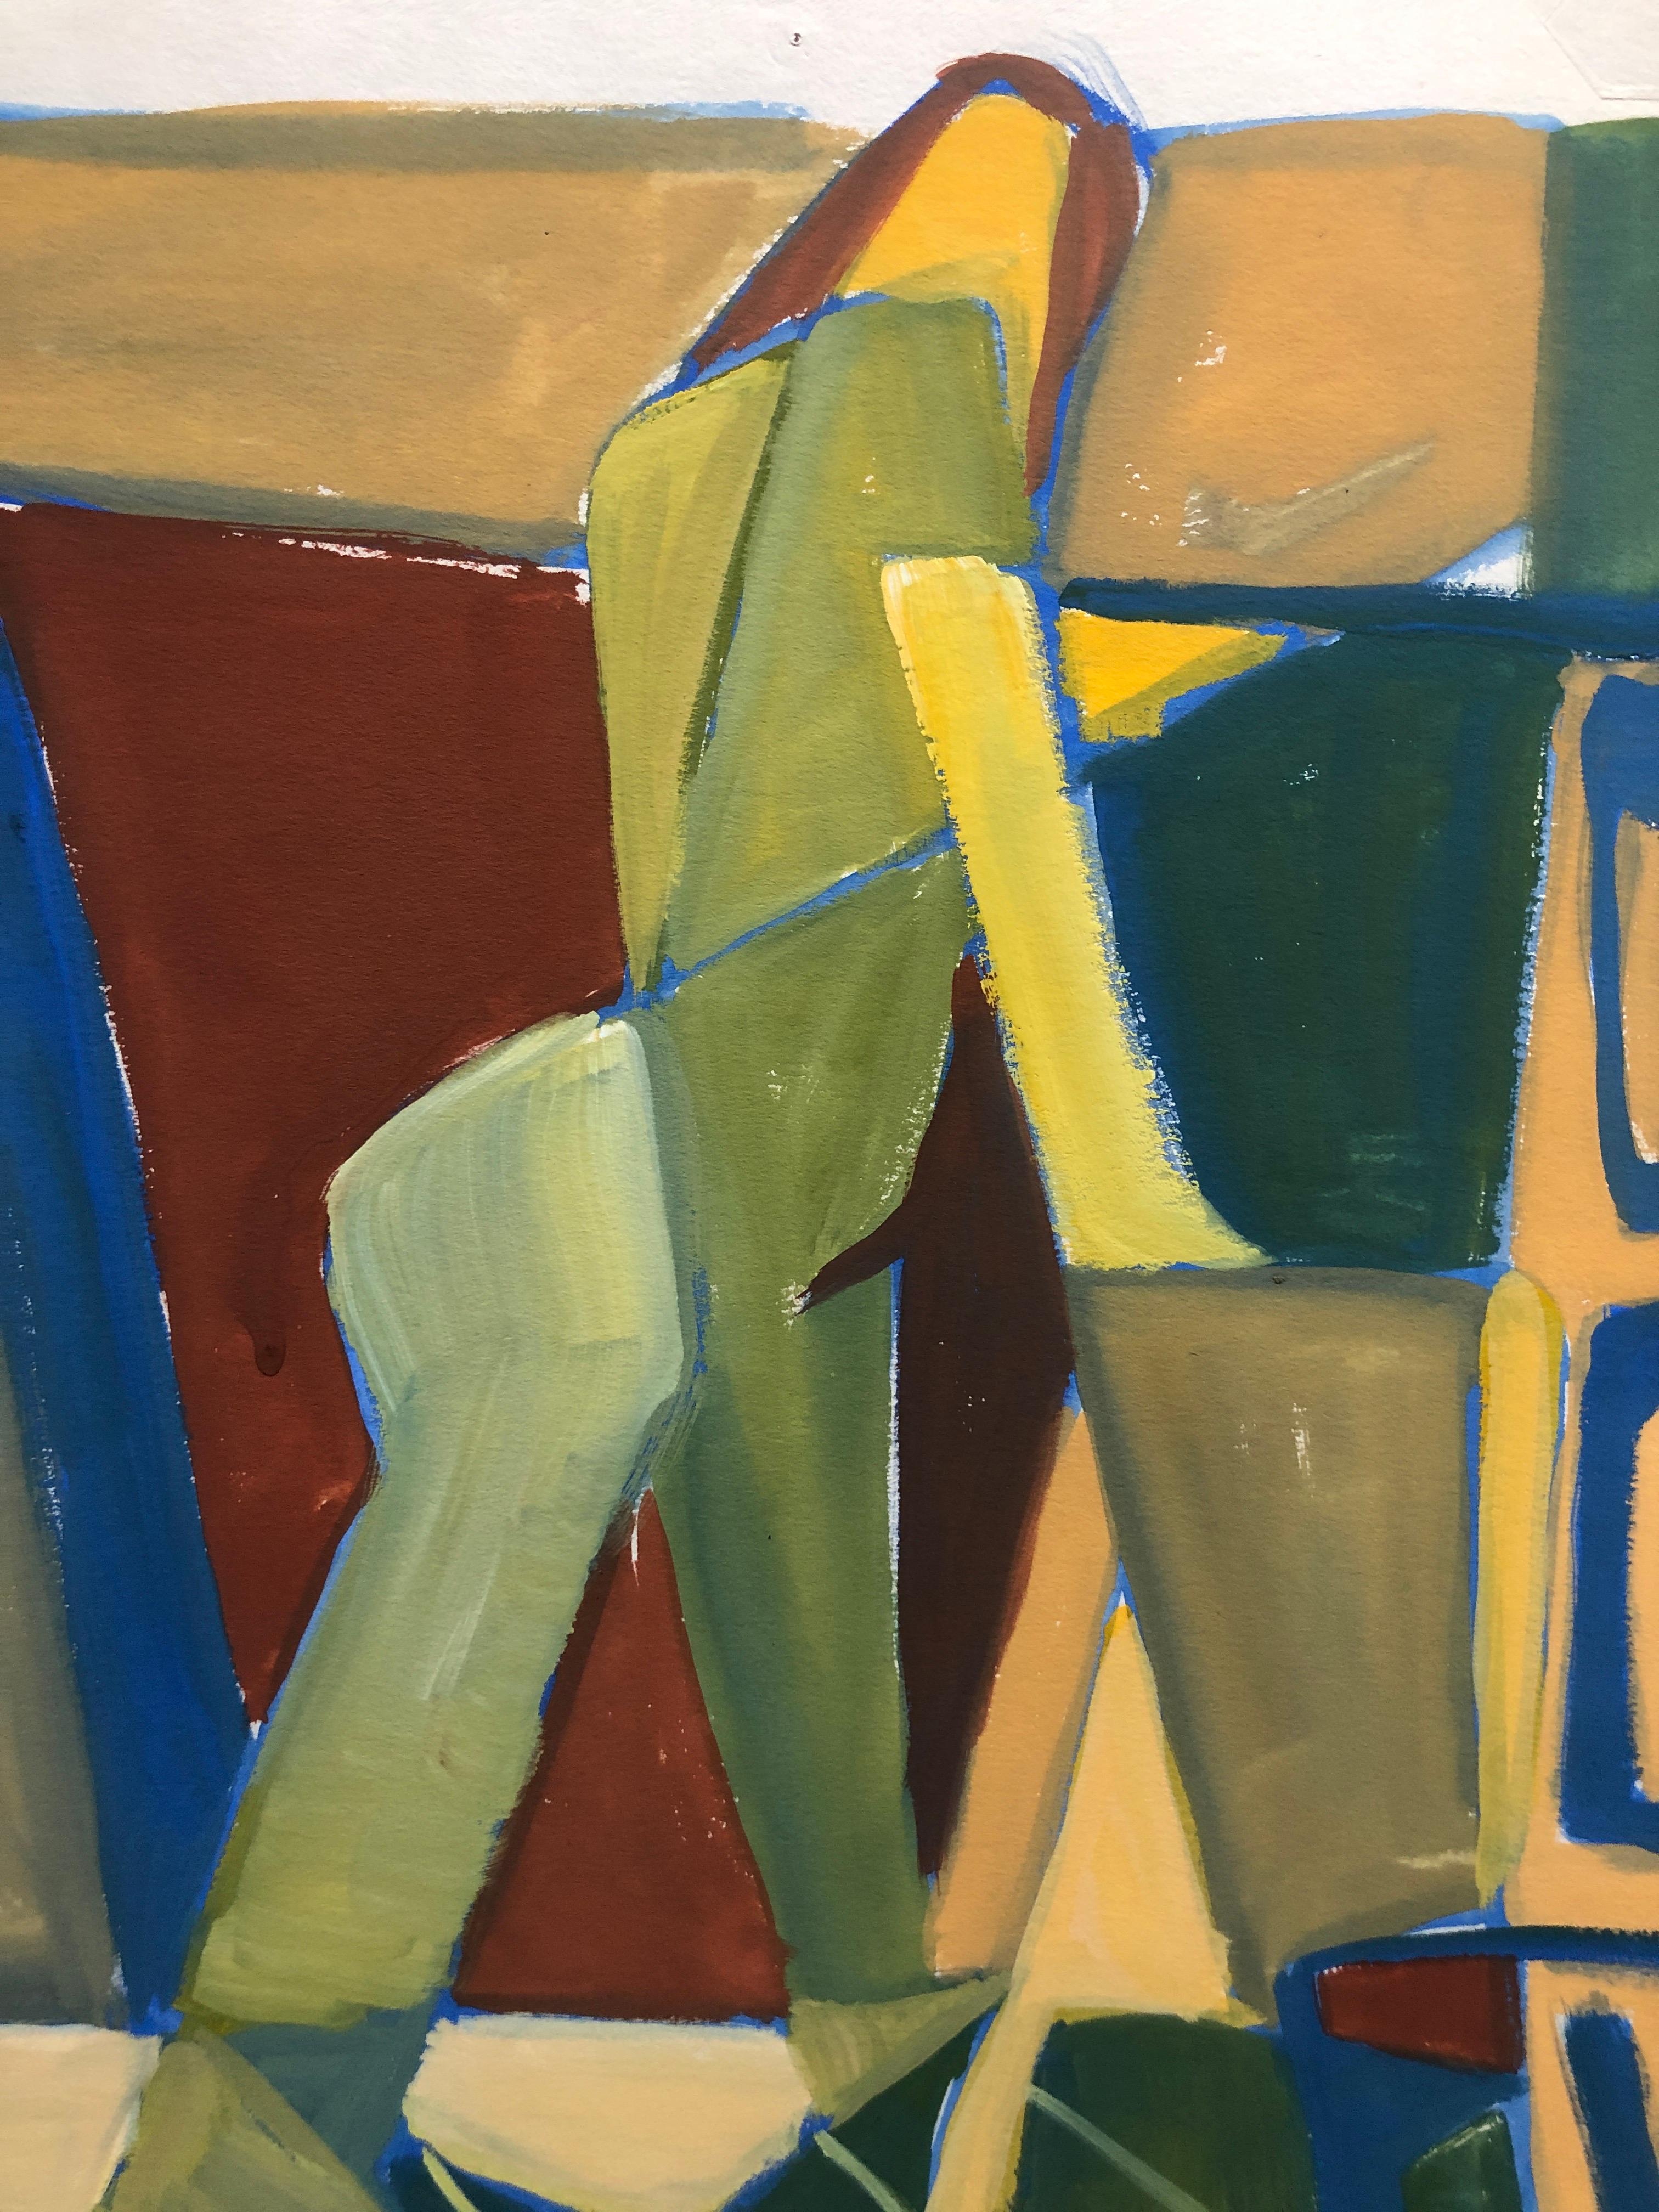 Unknown Nude Painting - 1950s "Shapes with Figure" Mid Century Cubist Nude Gouache Painting